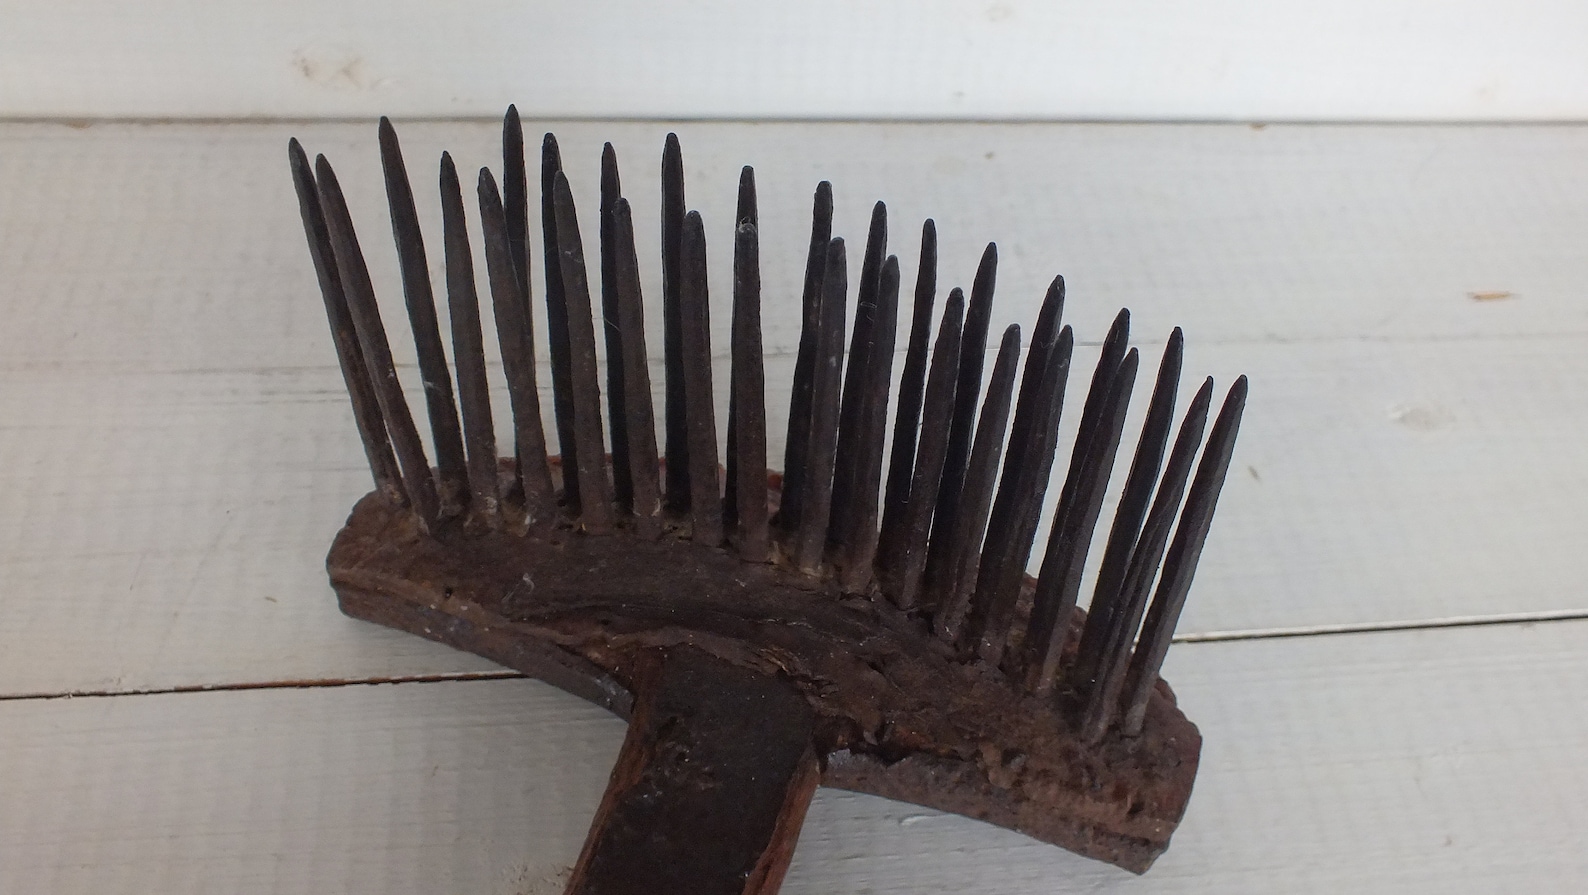 Antique Wool Comb Rare Old Wool Tool Ethnic Wooden Comb - Etsy UK